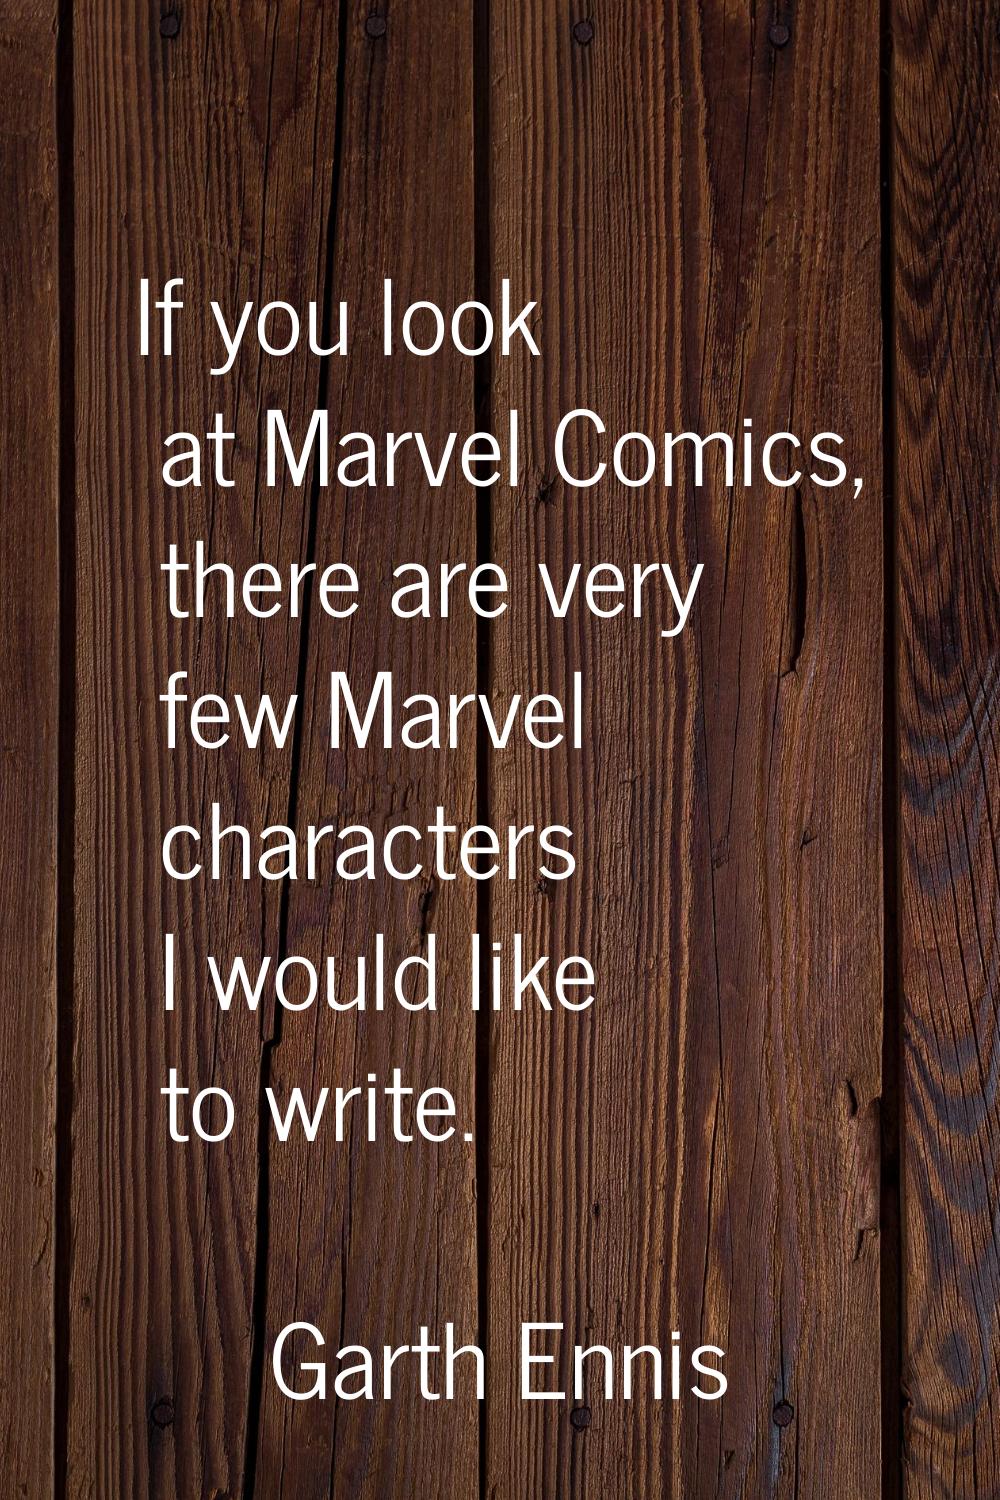 If you look at Marvel Comics, there are very few Marvel characters I would like to write.